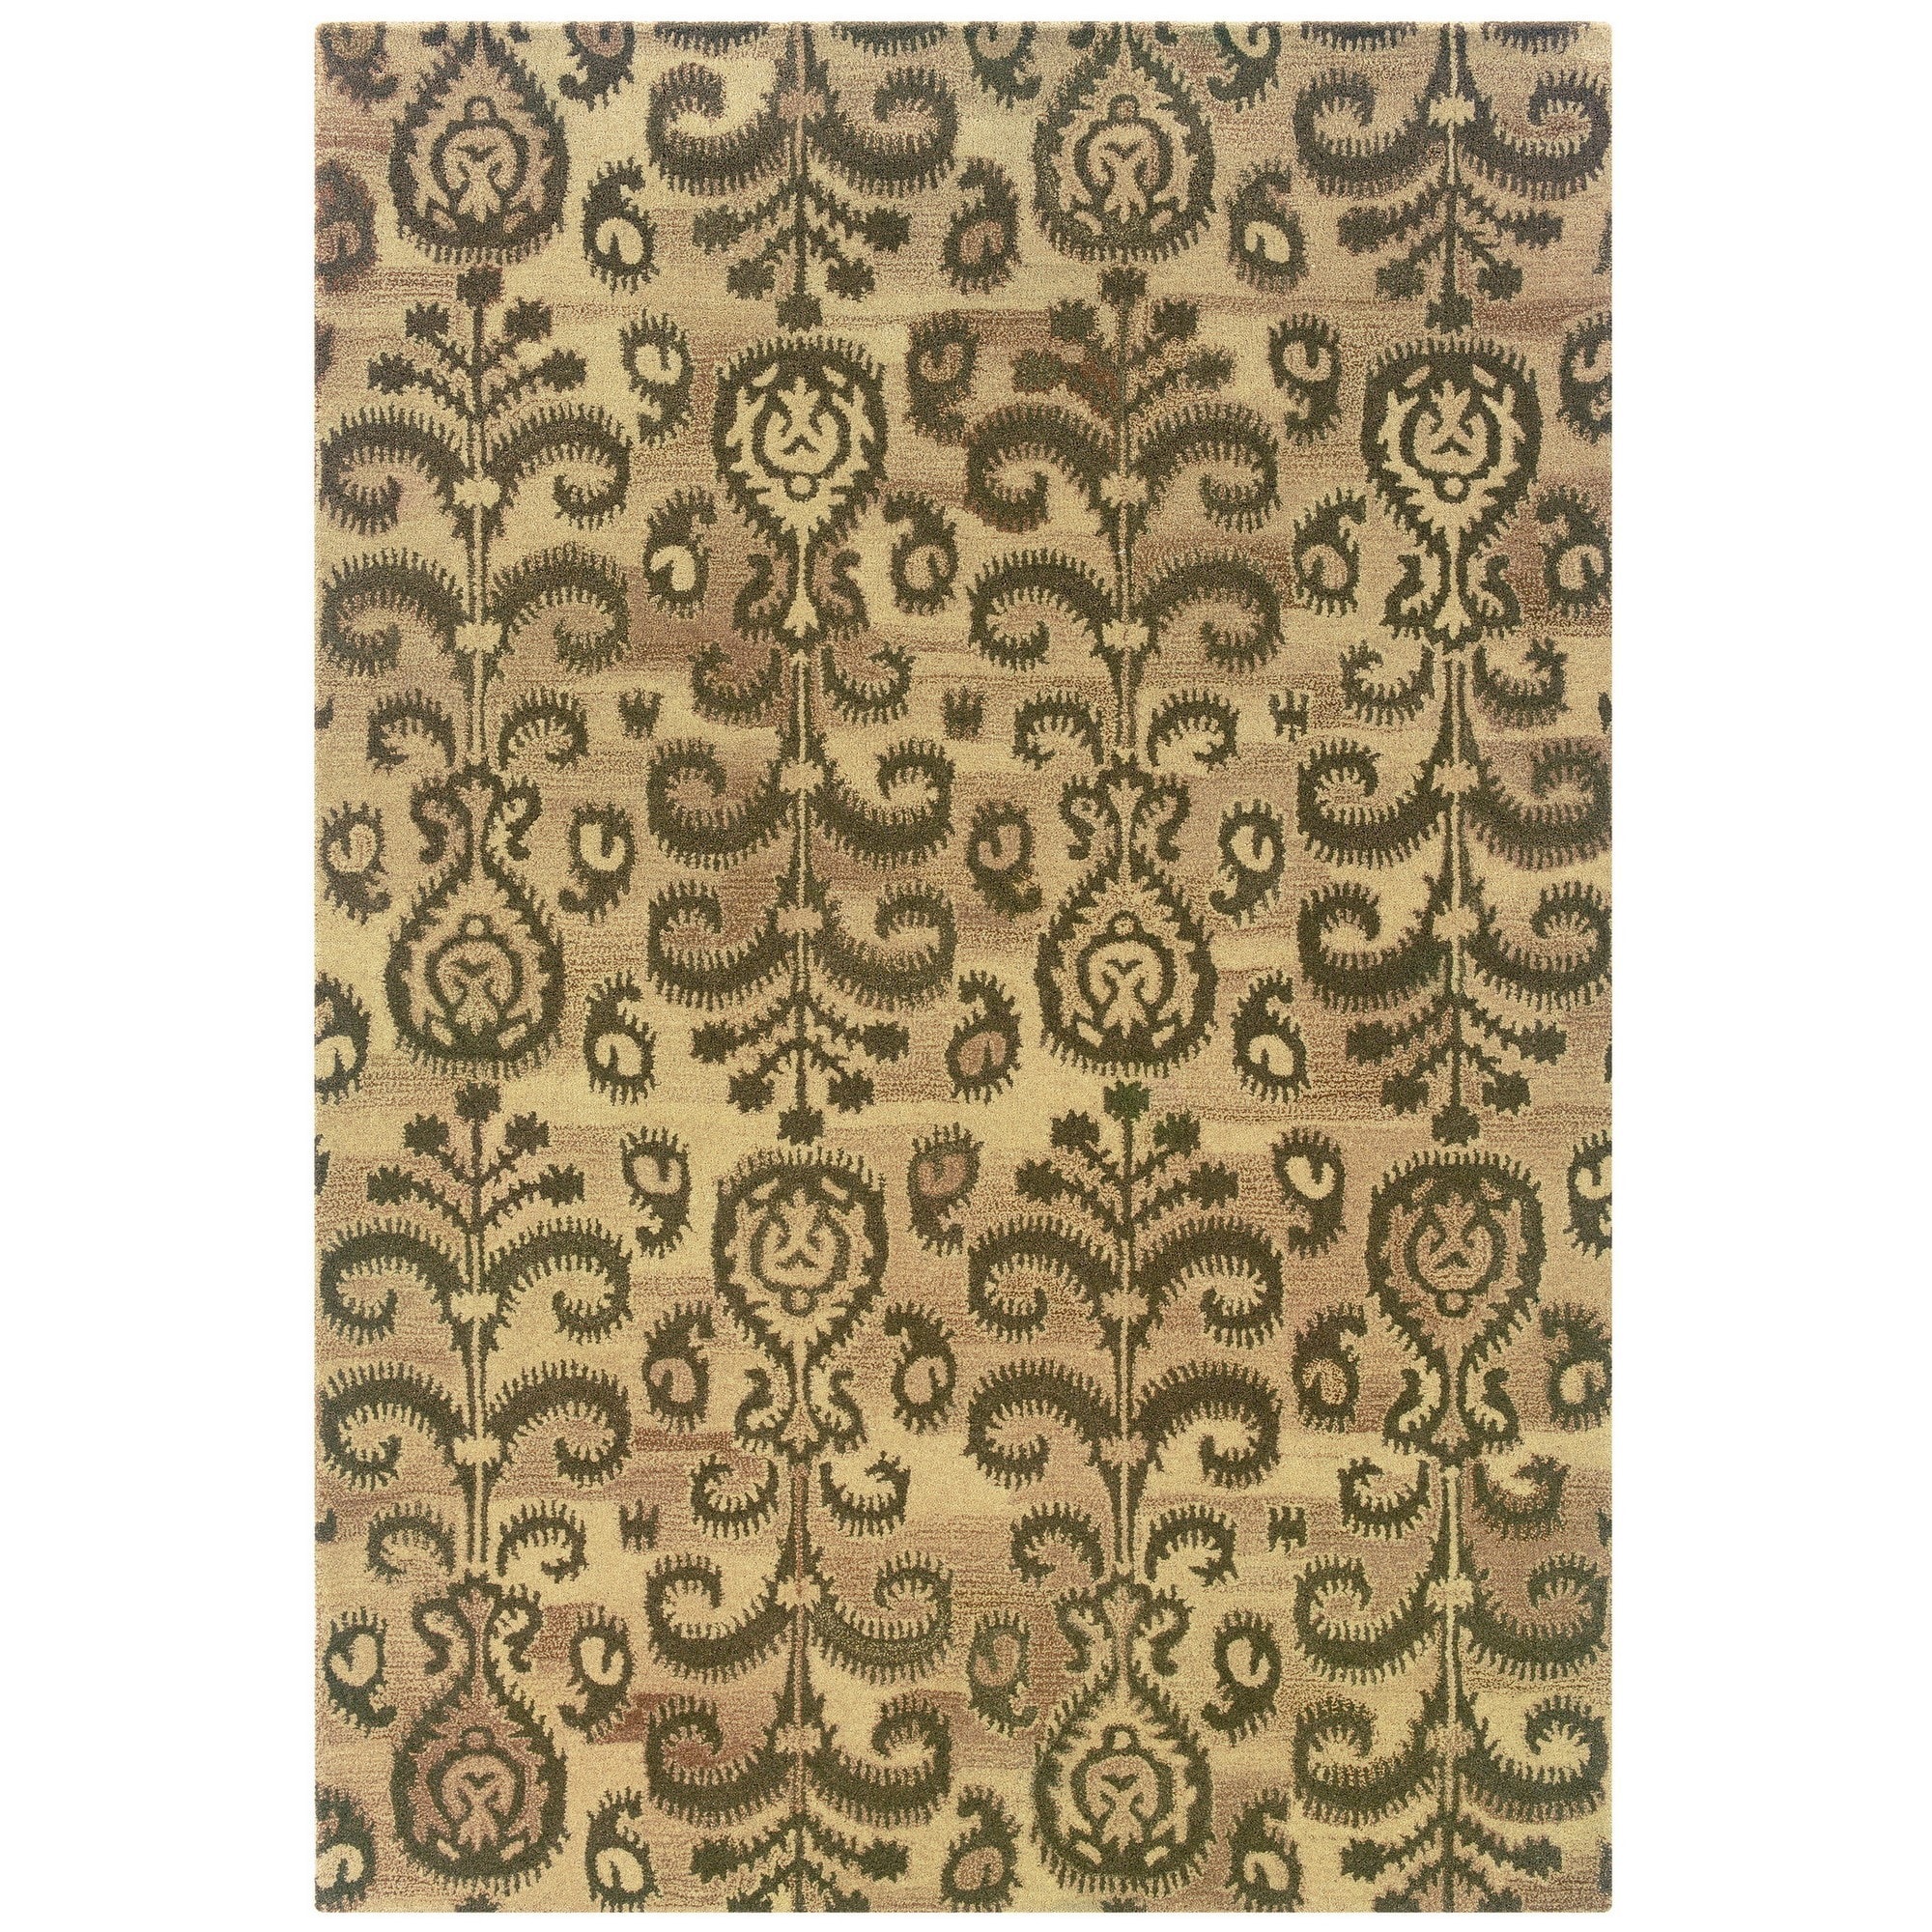 Style Haven Ikat Floral Hand made Beige/ Brown Rug (8 X 10) Beige Size 8 x 10